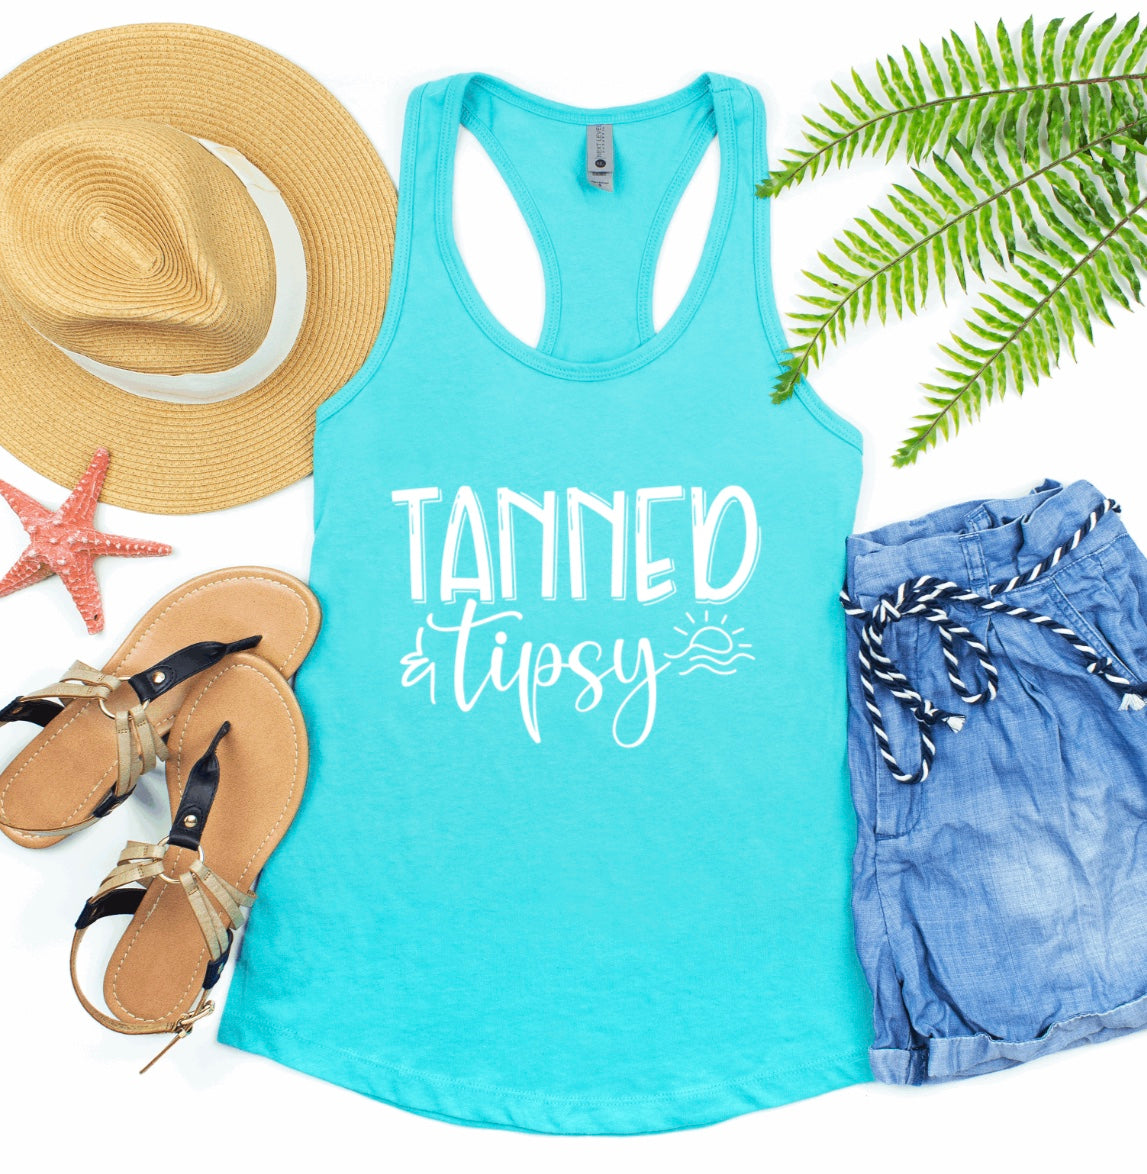 Tanned and tipsy racerback tank top 